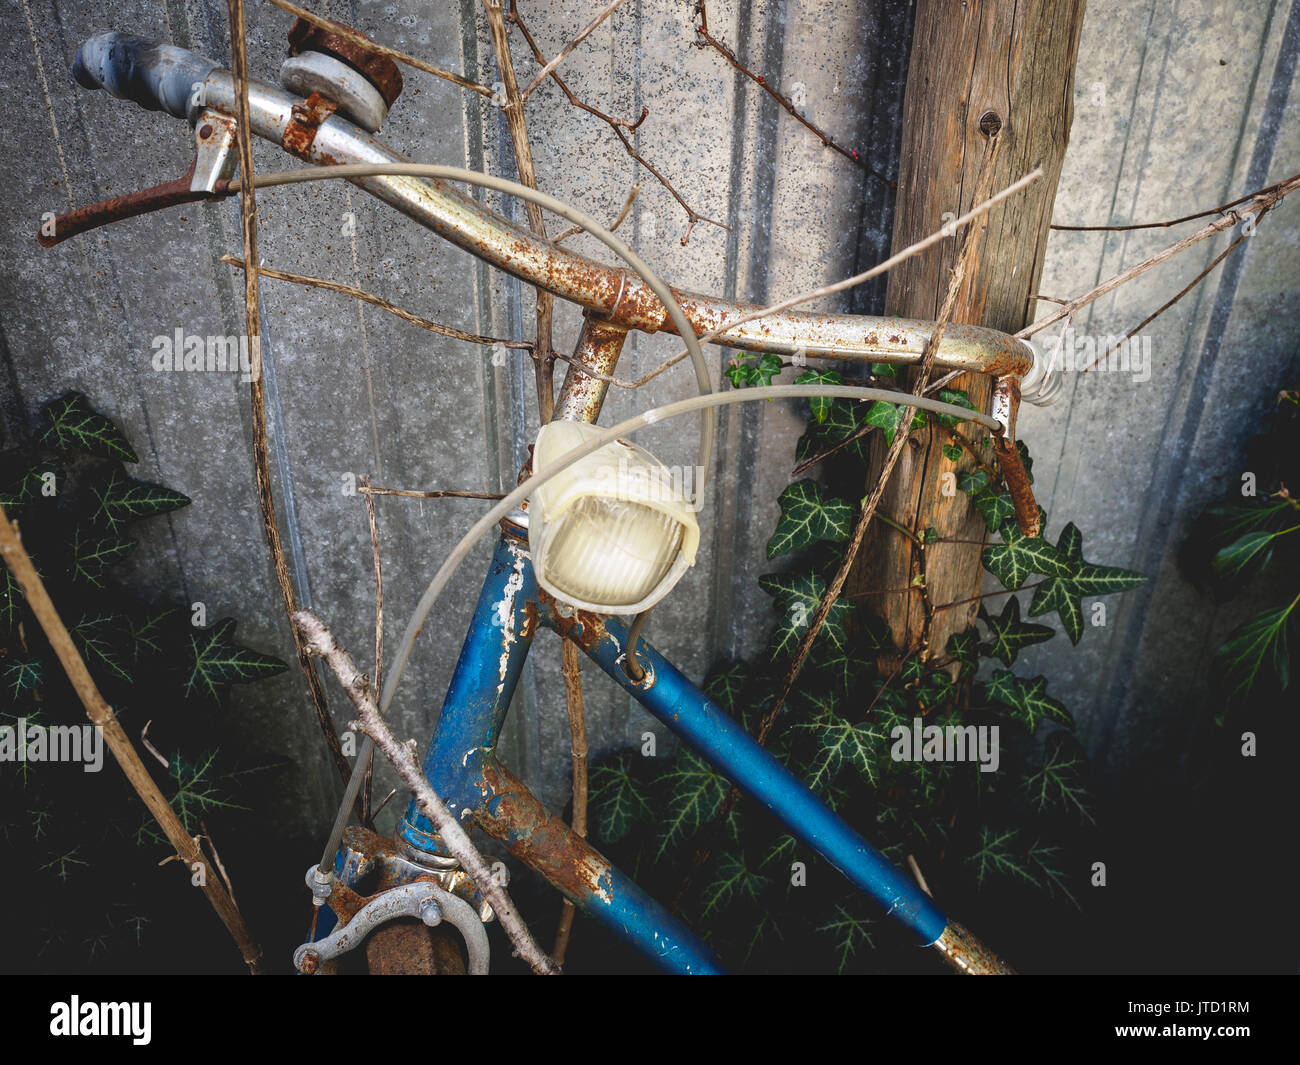 Detail of an abandoned old vintage rusty bicycle with ivy on the background found in rural shed in the Italian countryside. Stock Photo